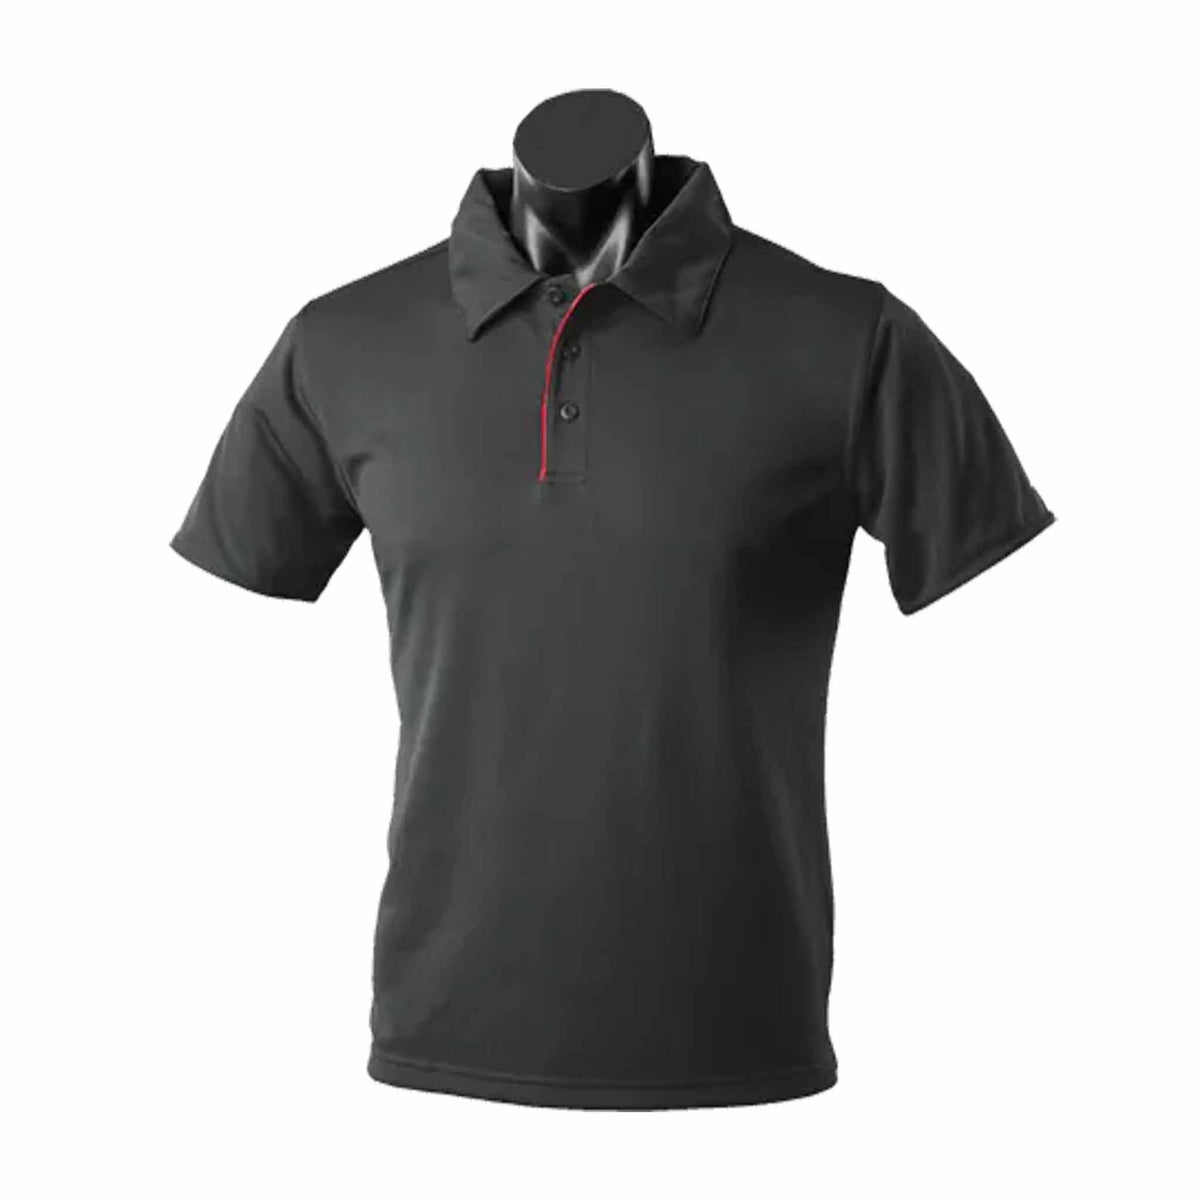 aussie pacific yarra mens polo in black red